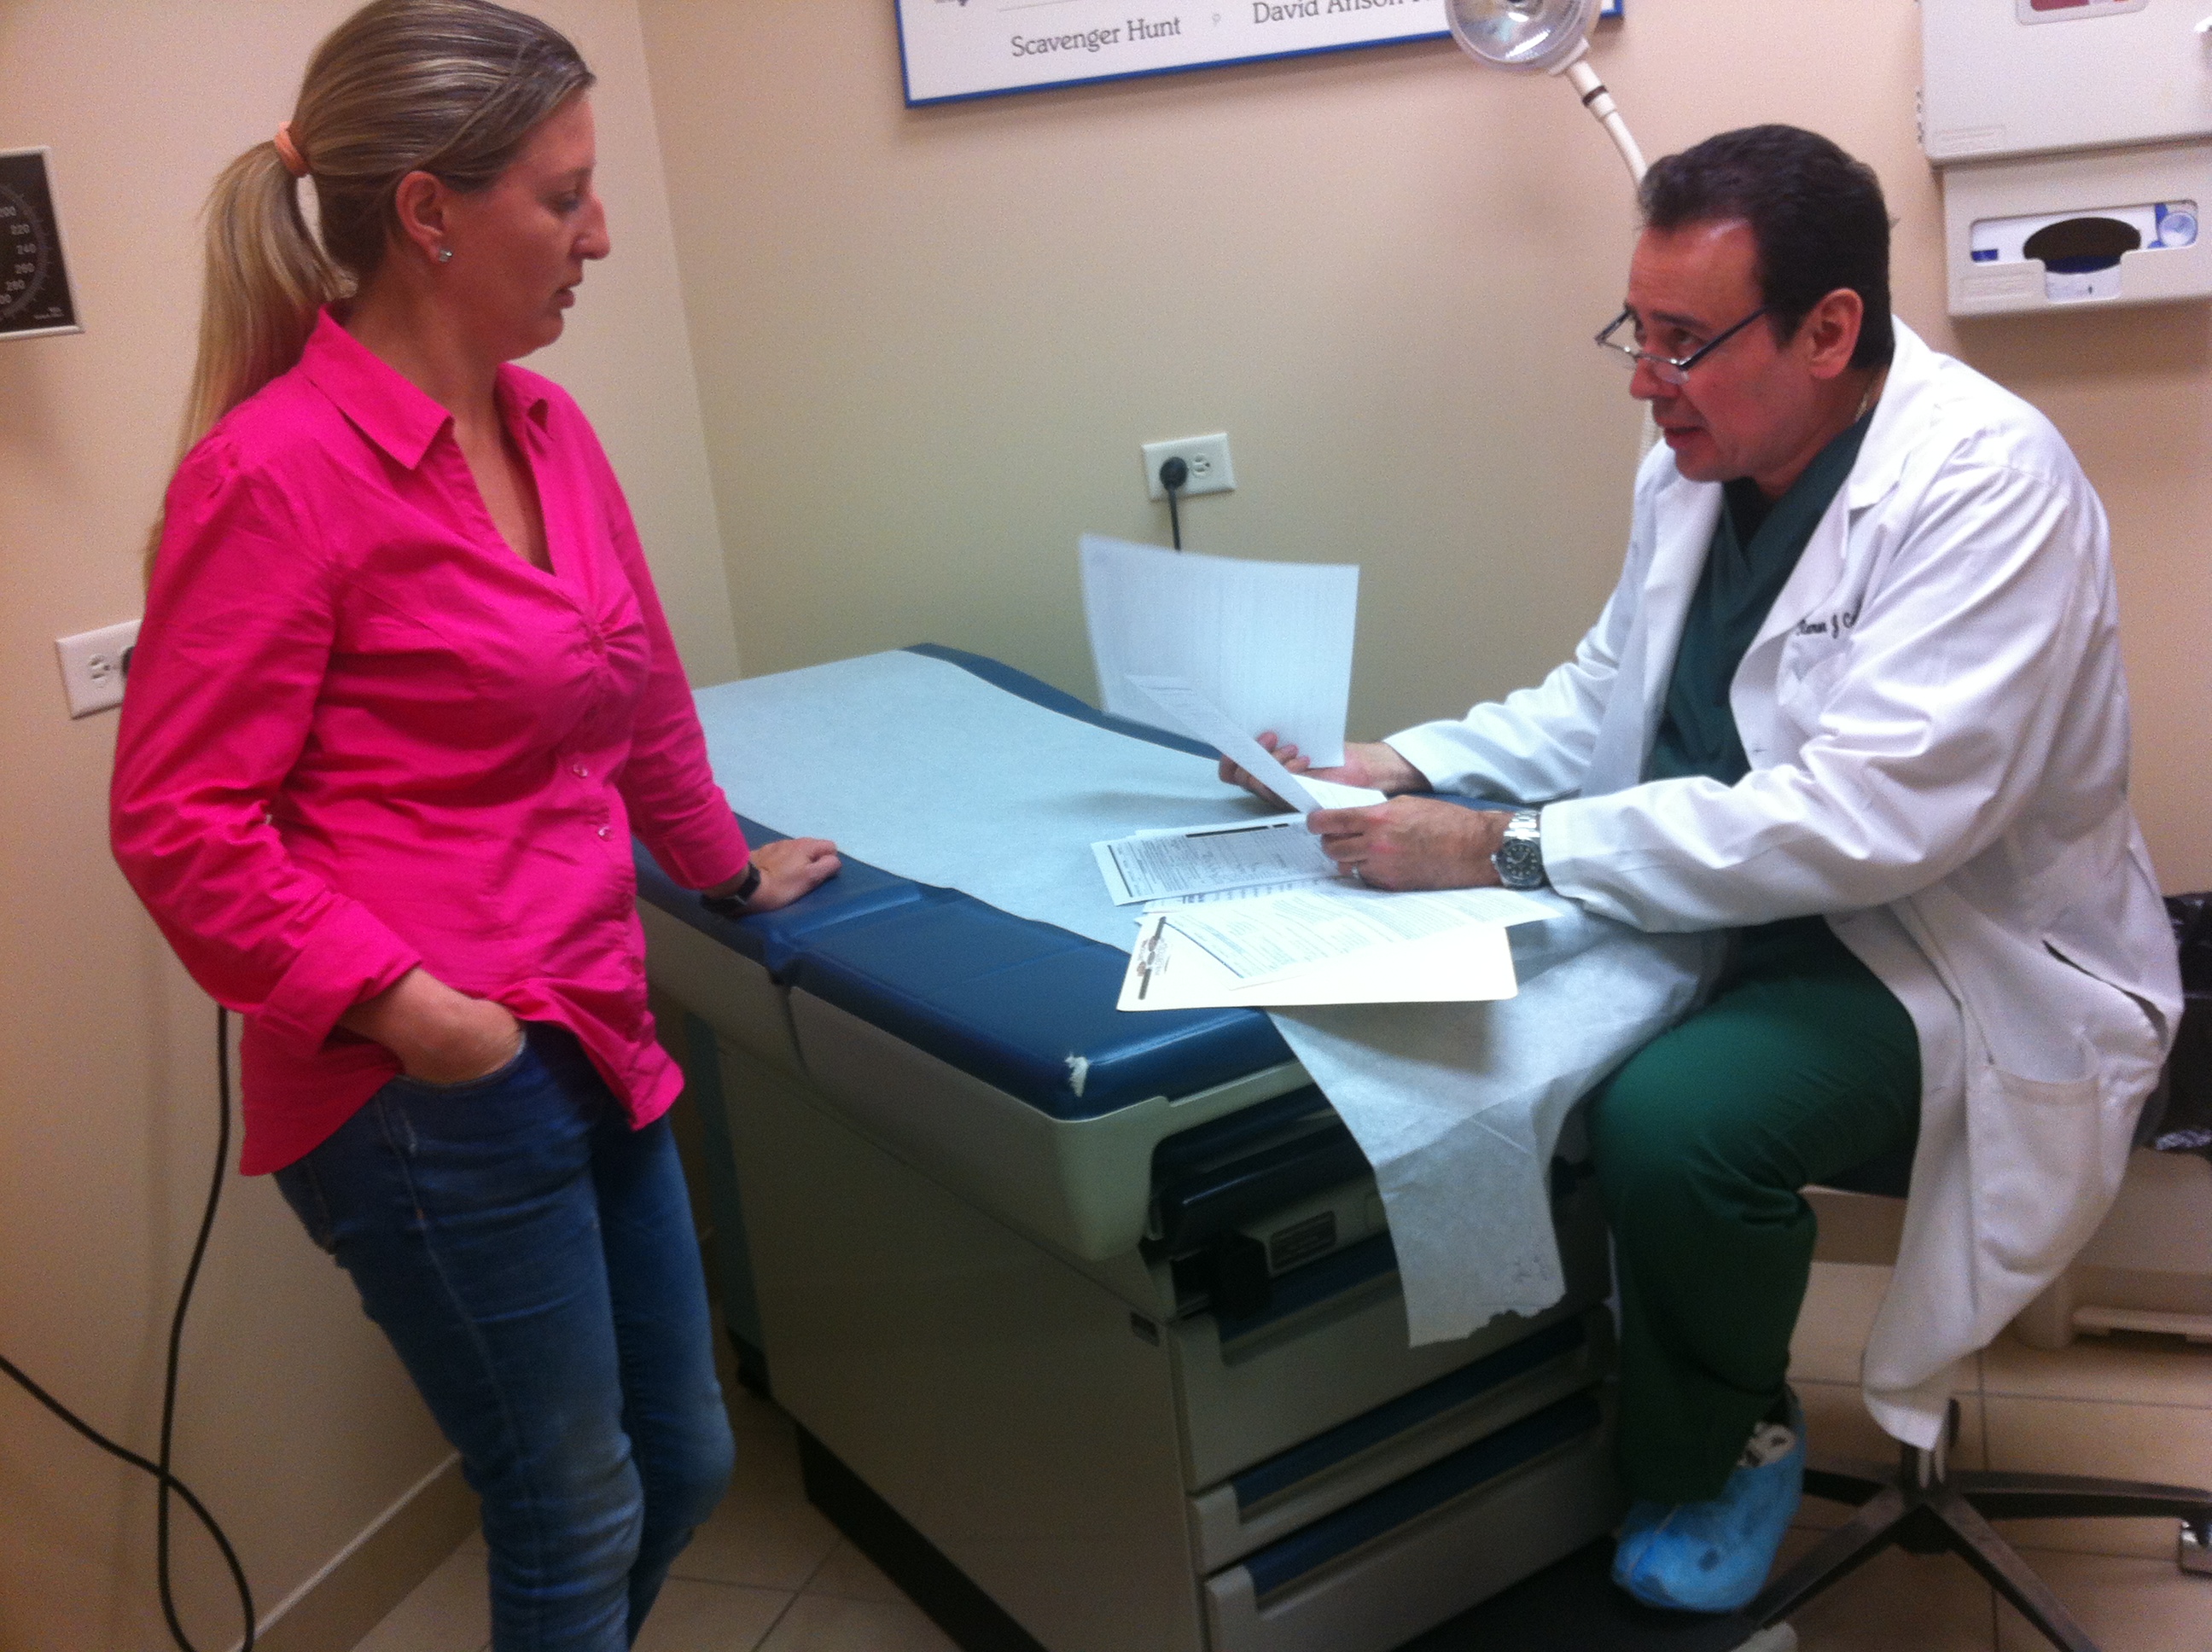 Chicago Vein Care Center: No Trouble with Best Vein Doctors in Chicago